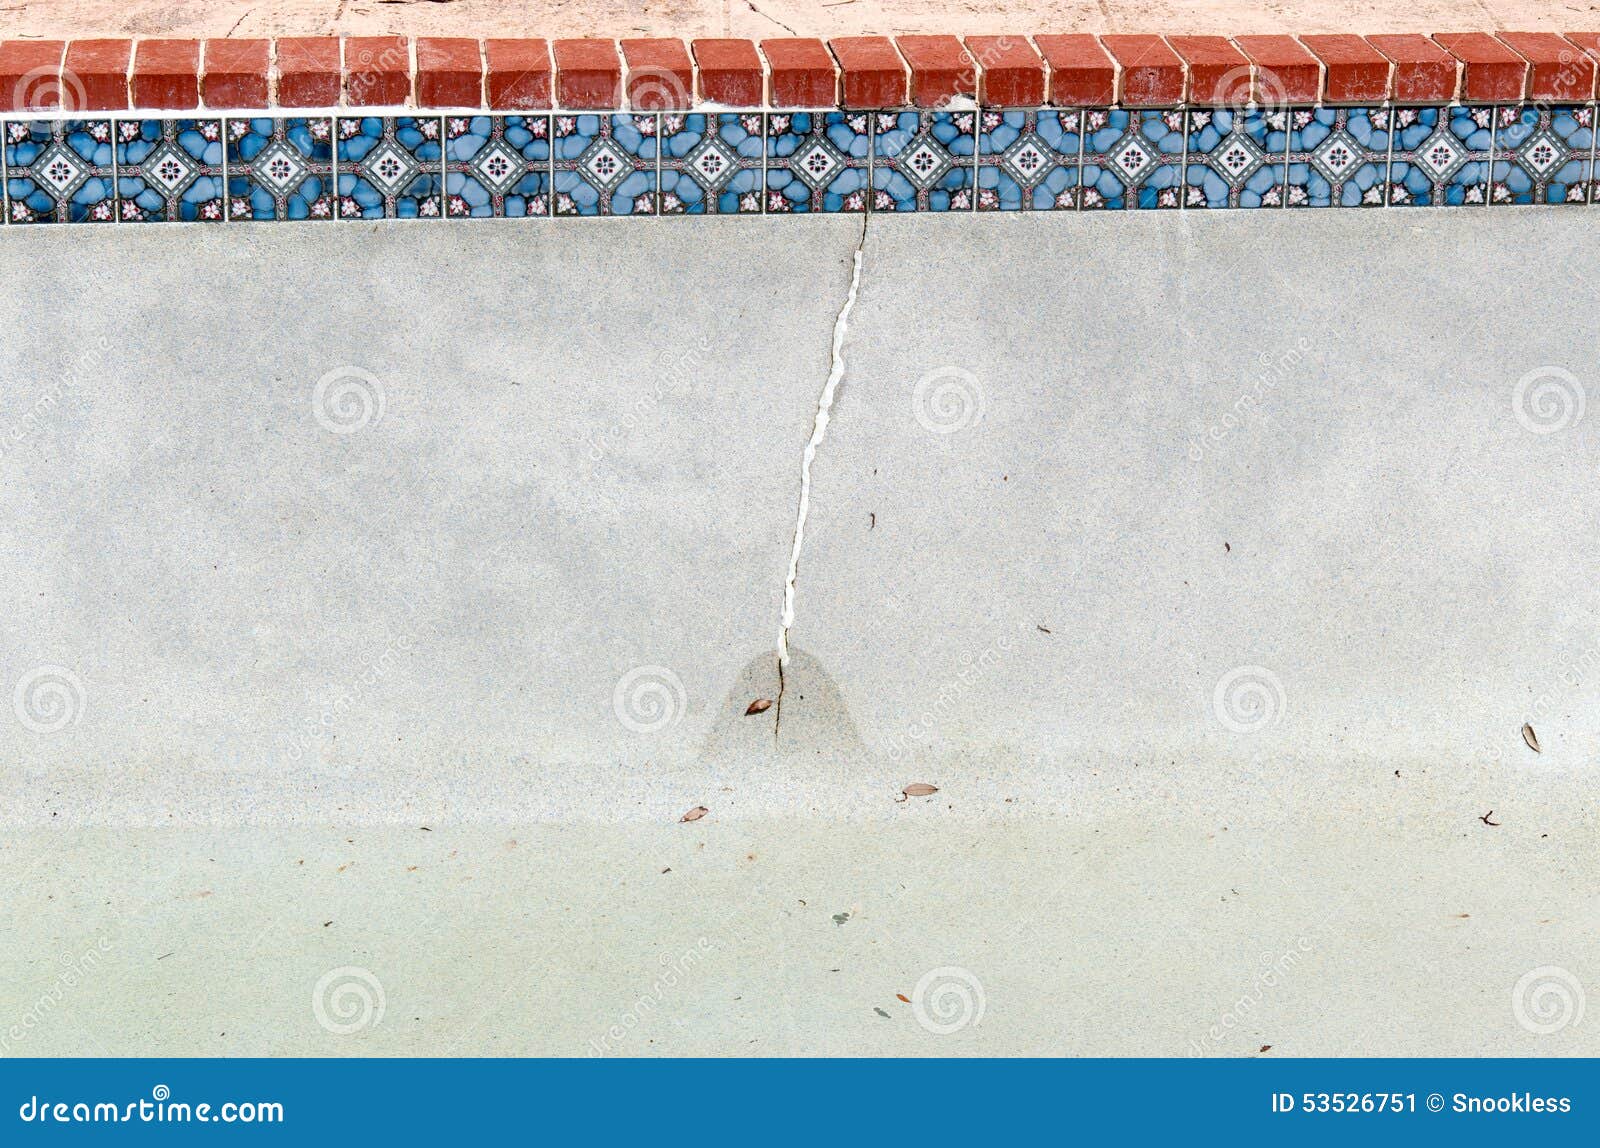 crack in pool wall